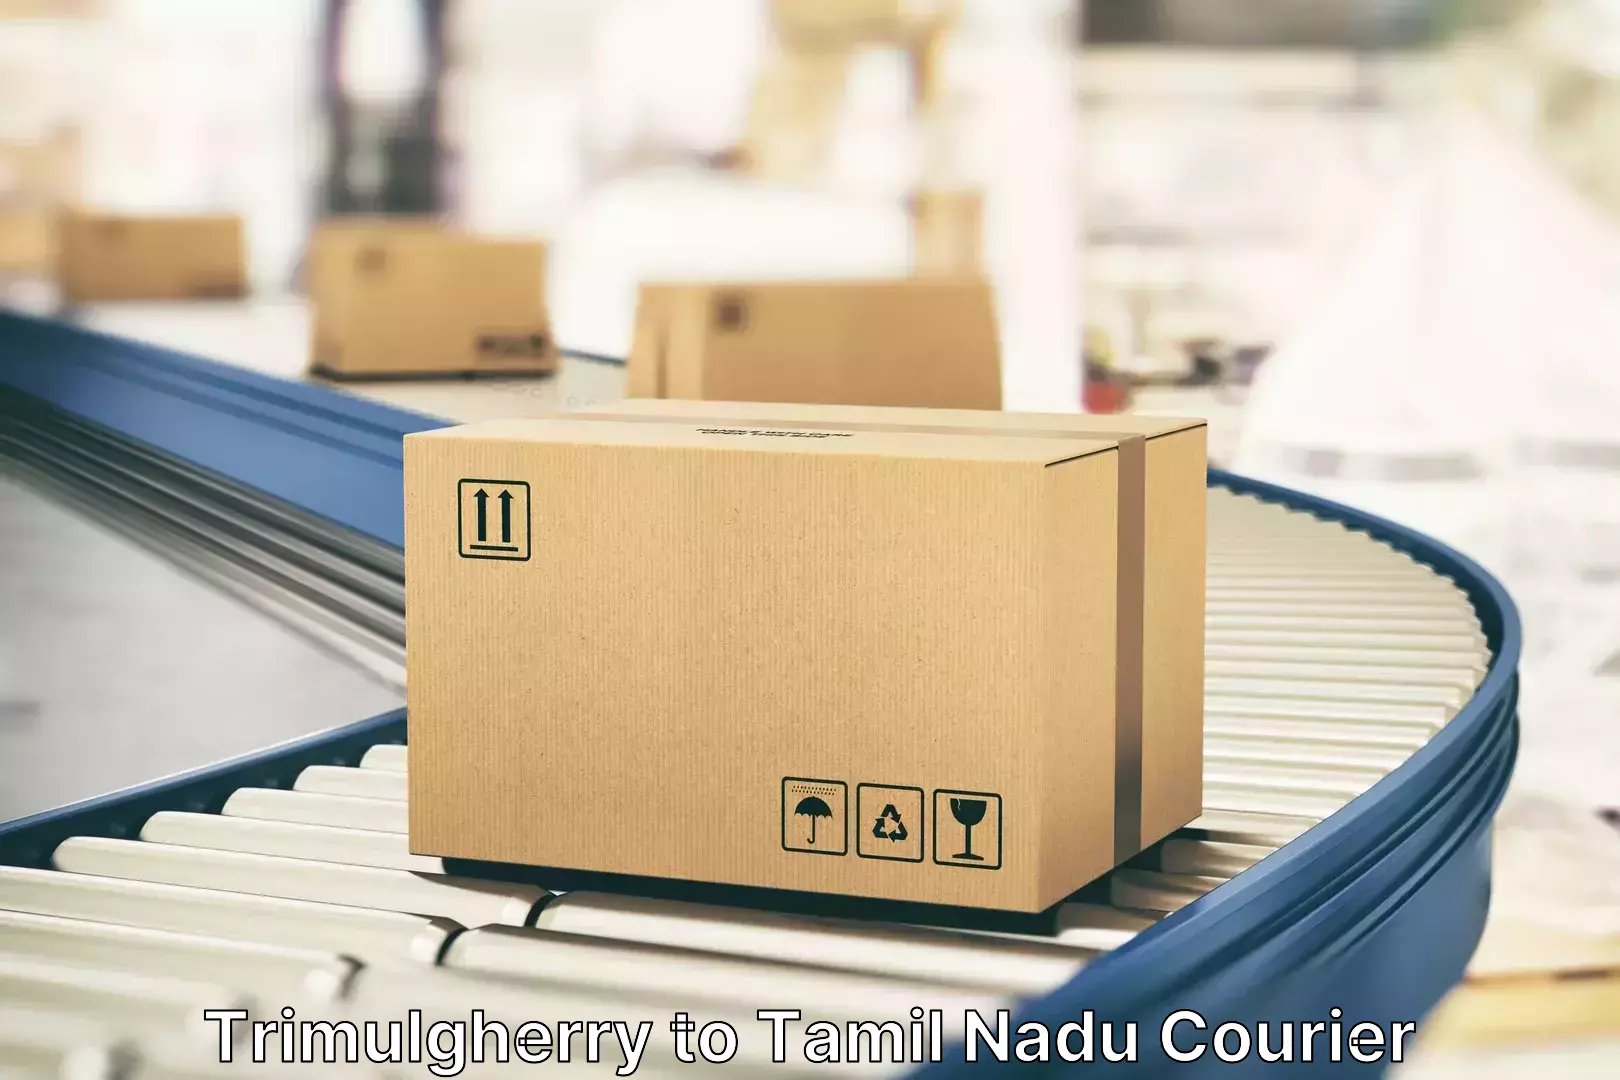 Luggage delivery logistics Trimulgherry to Dindigul